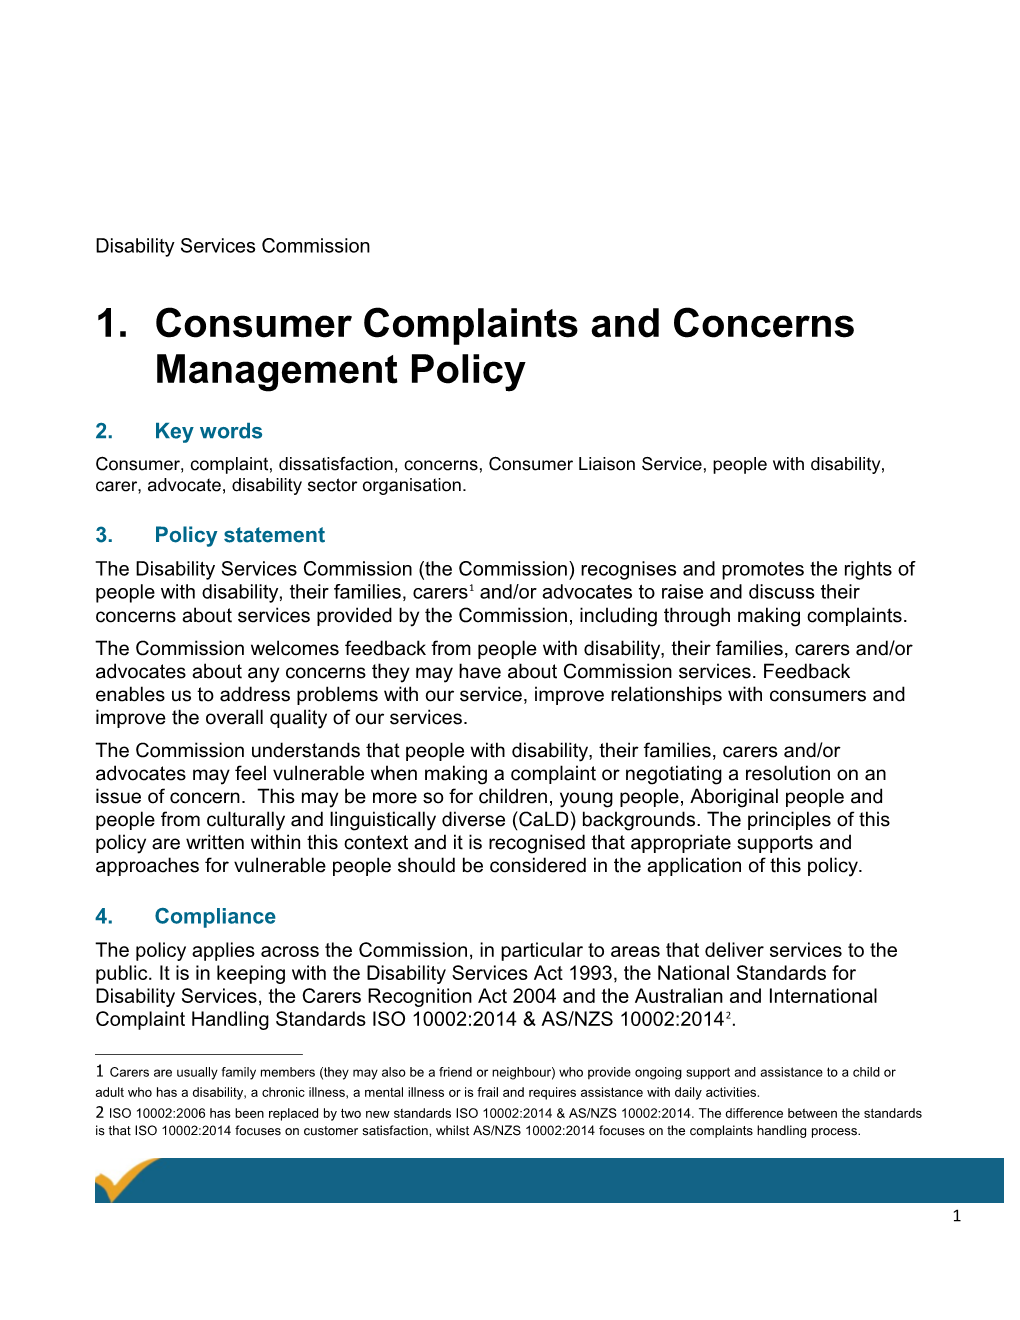 Consumer Complaints and Concerns Management Policy